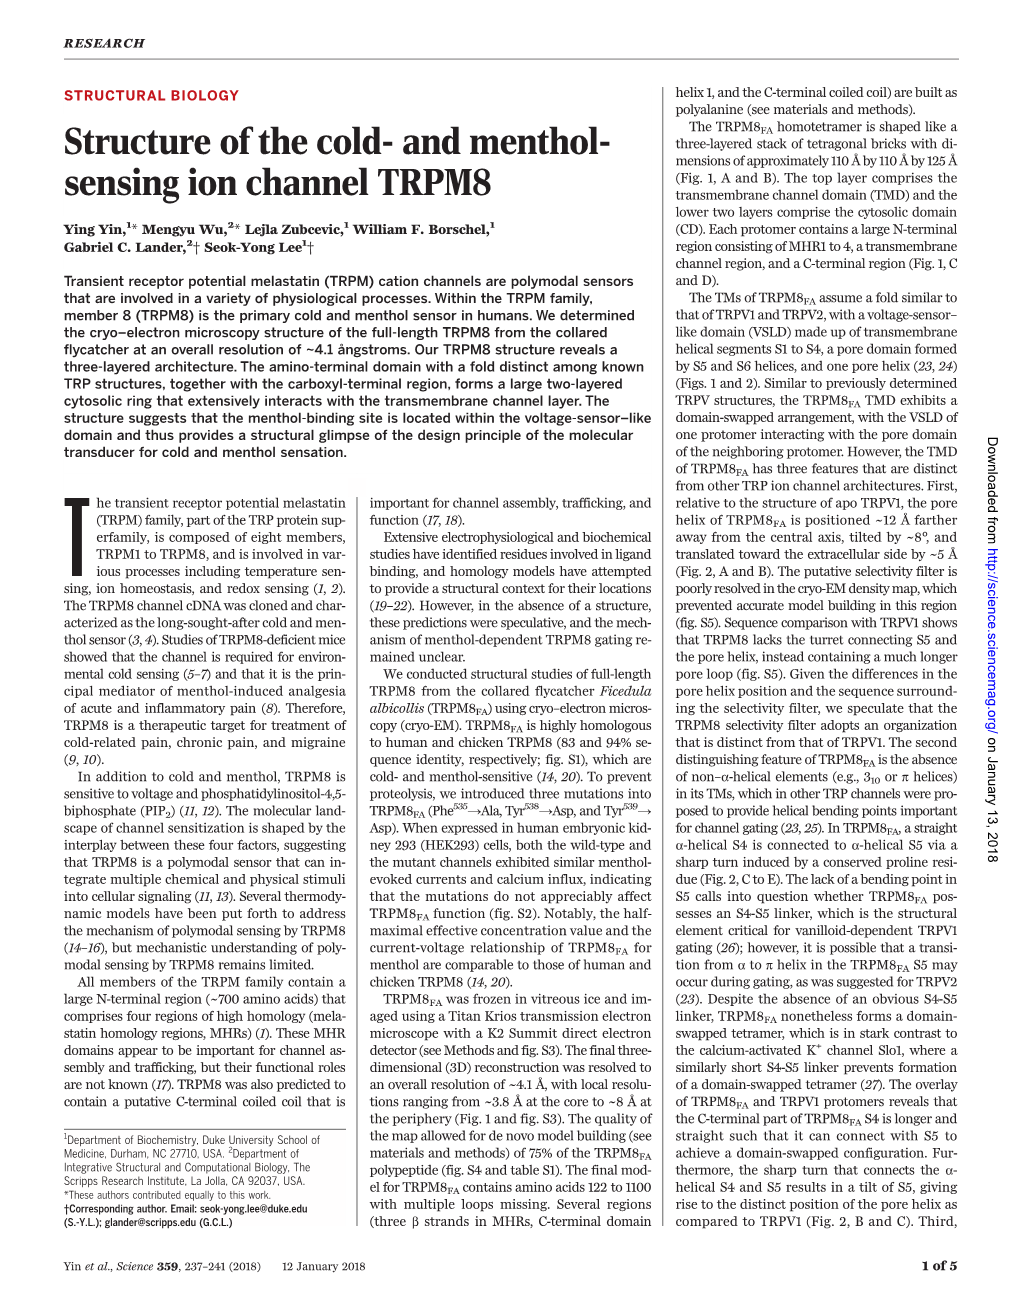 Structure of the Cold- and Menthol- Sensing Ion Channel TRPM8